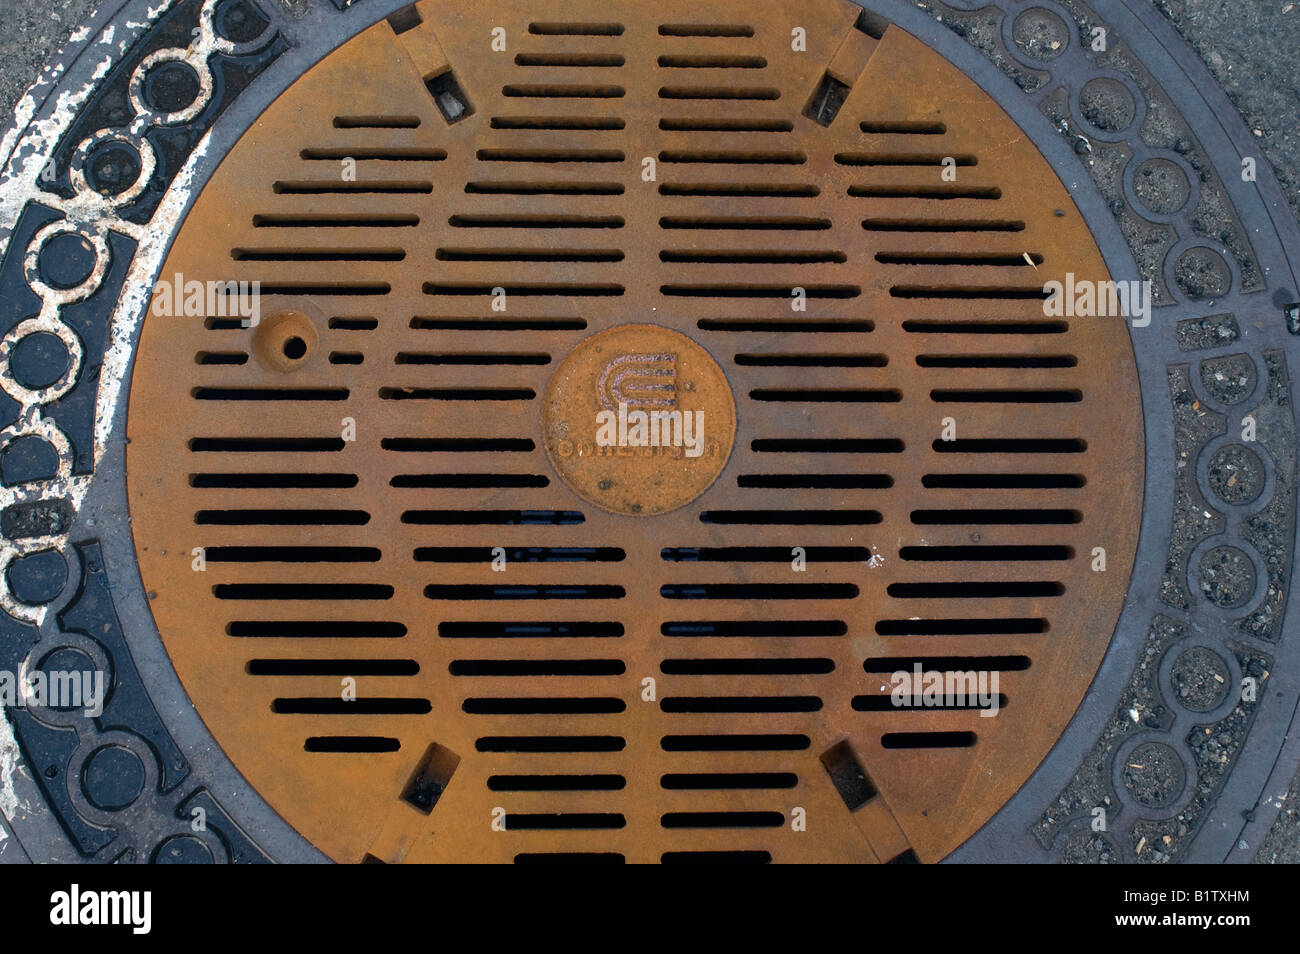 A manhole cover protecting electrical cables Stock Photo